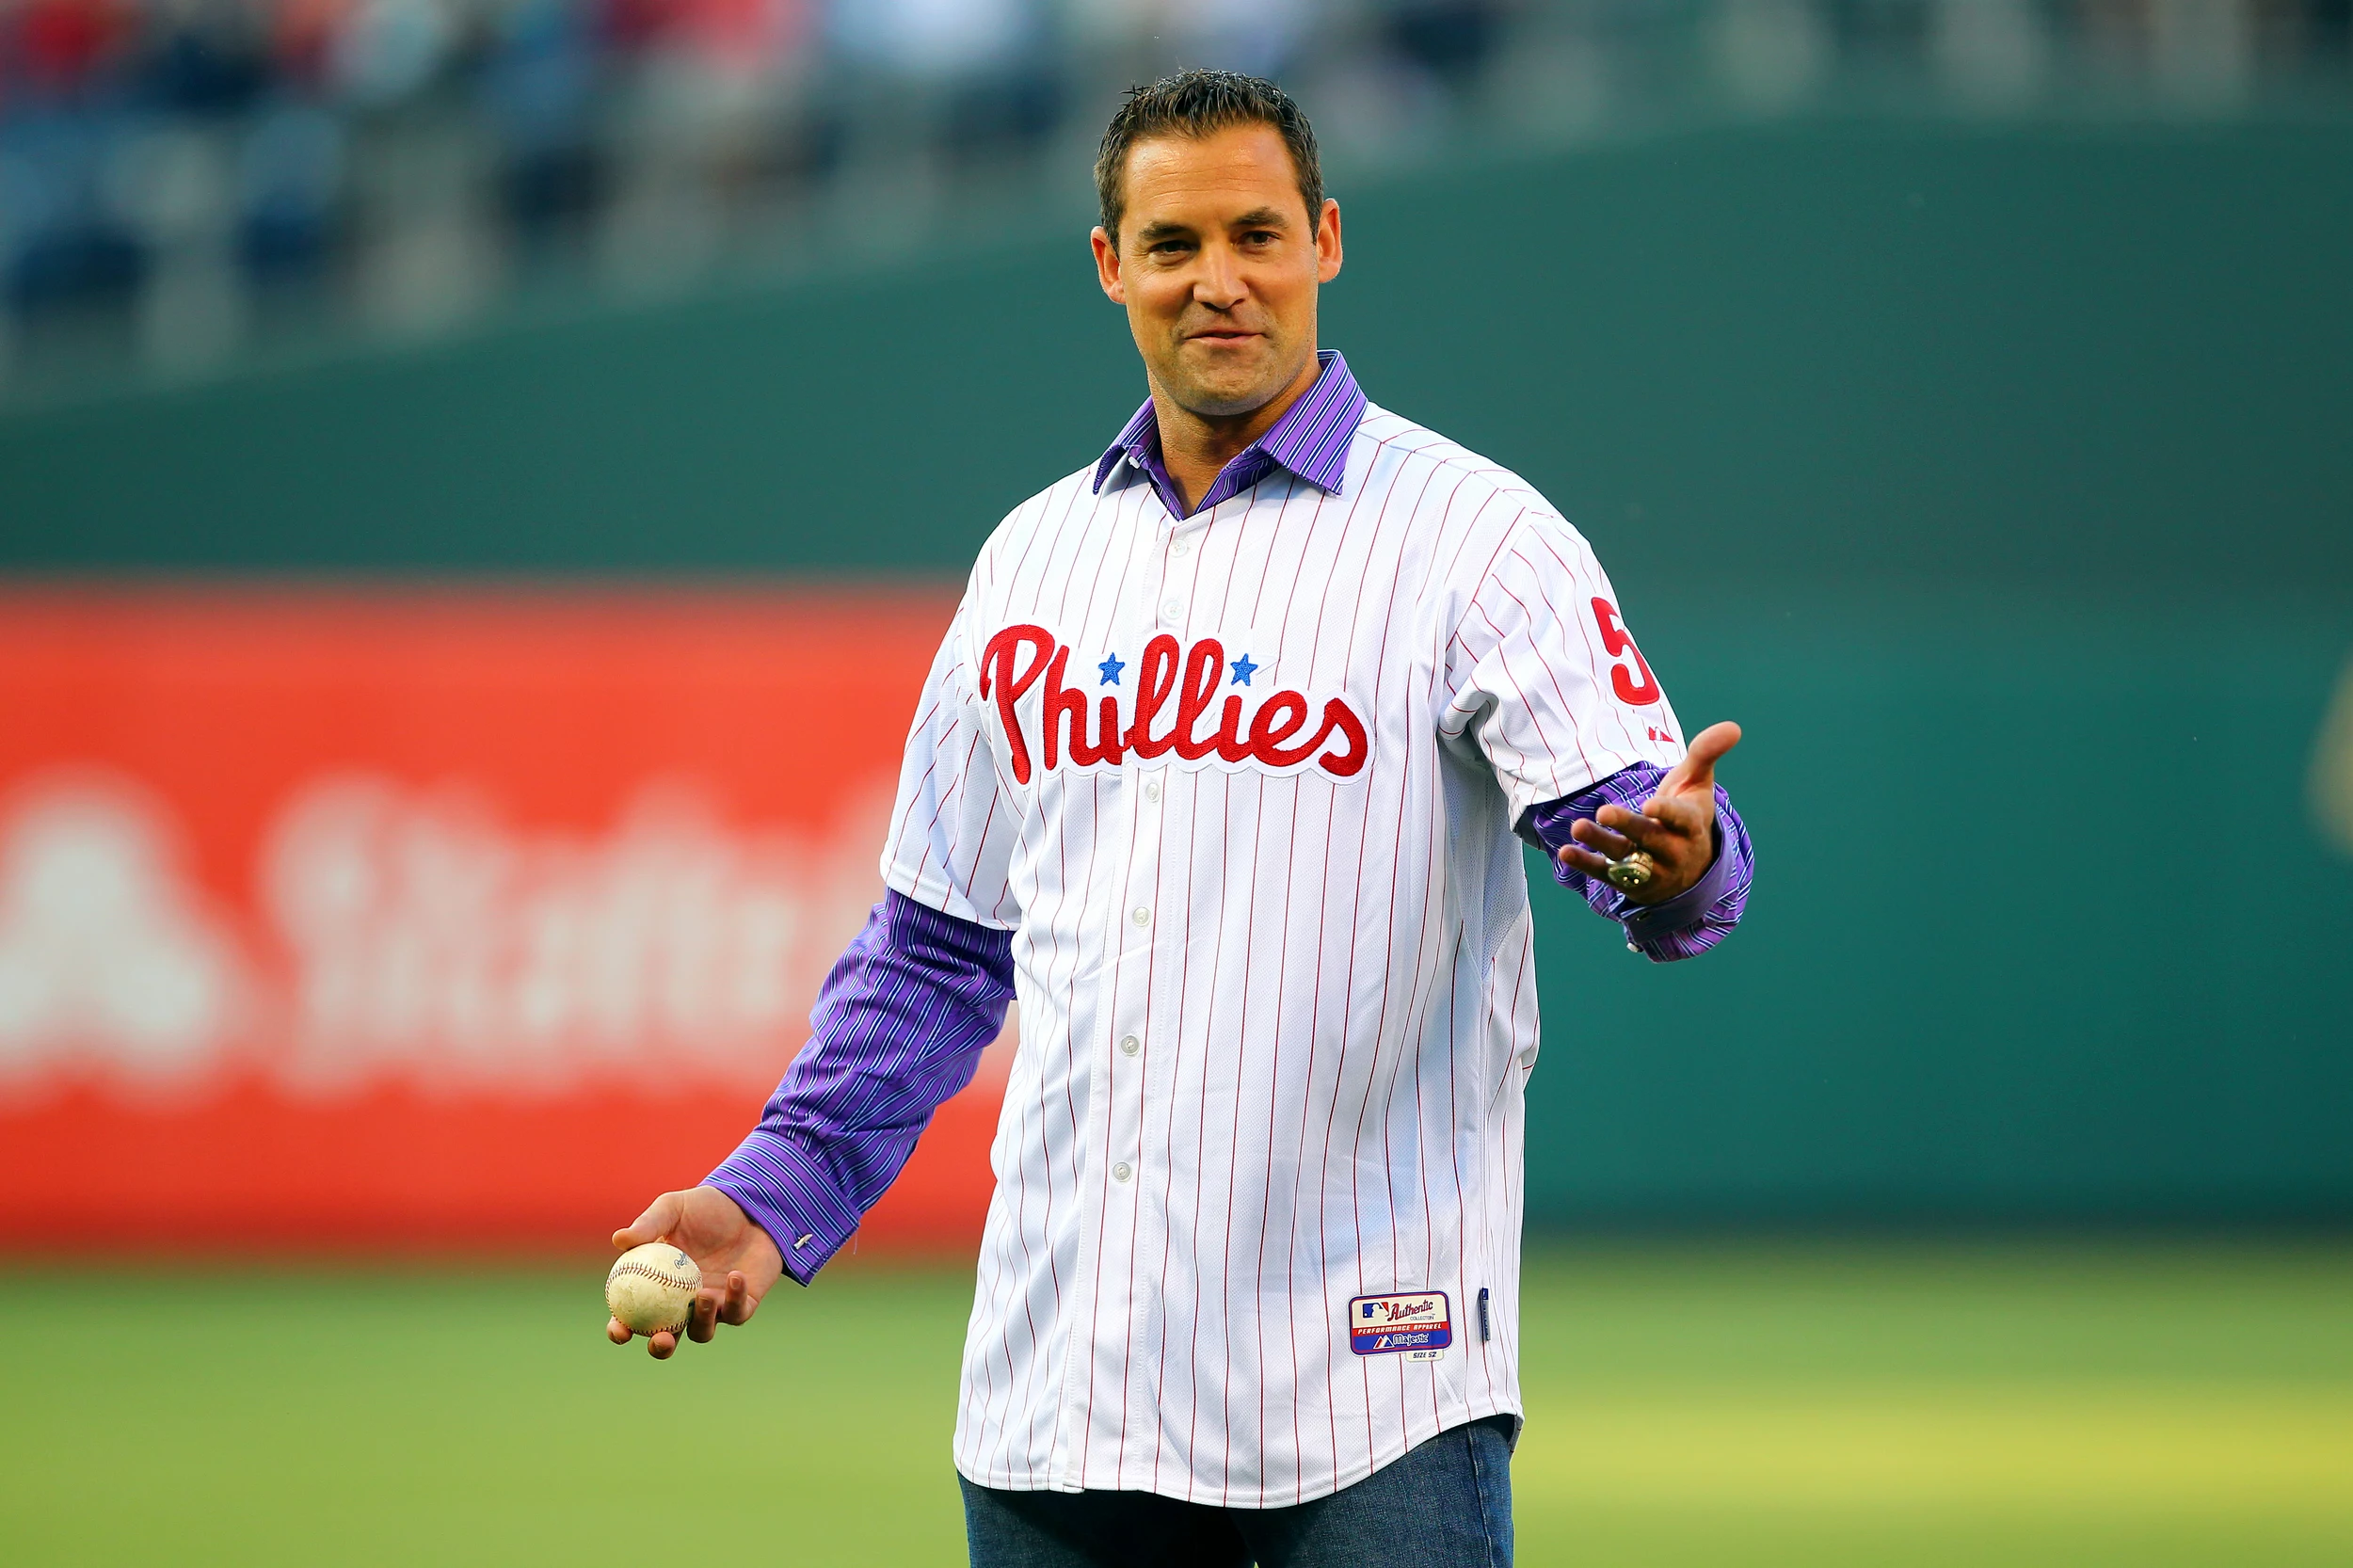 Philadelphia Phillies 2008 World Series Champ Pat Burrell Picture 12 x 12  inches